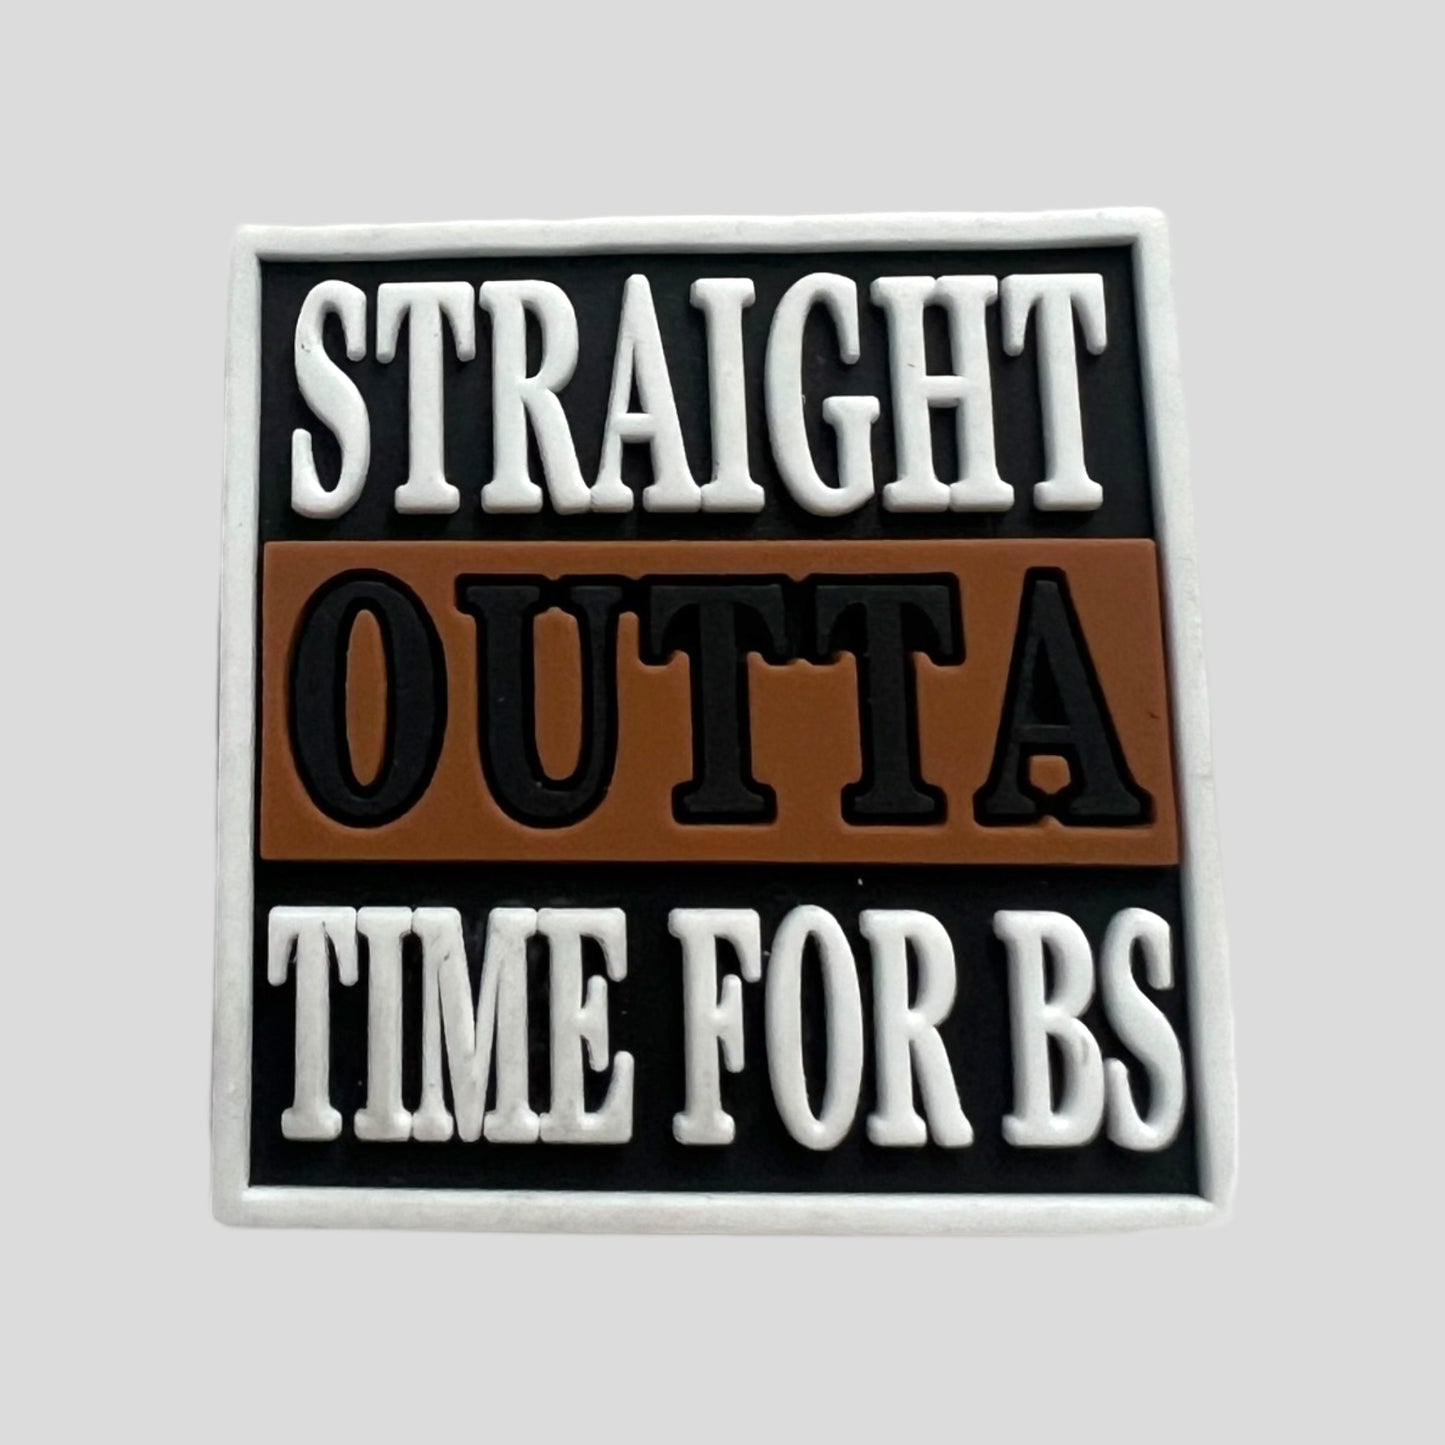 Straight Outta Time for BS | Quotes